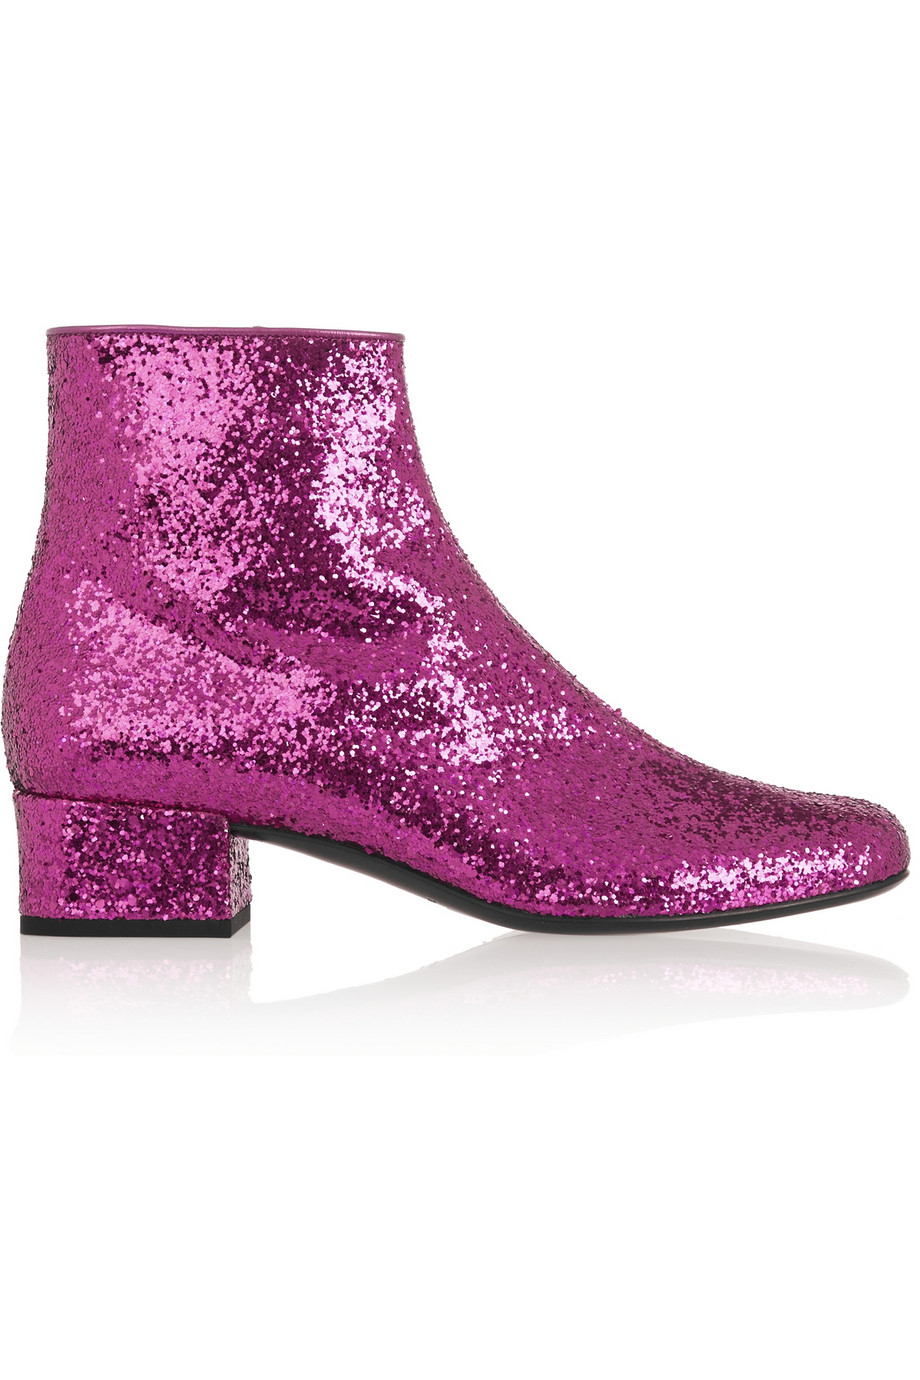 Saint Laurent Glitter-Finished Leather Ankle Boots in Pink (Purple) - Lyst